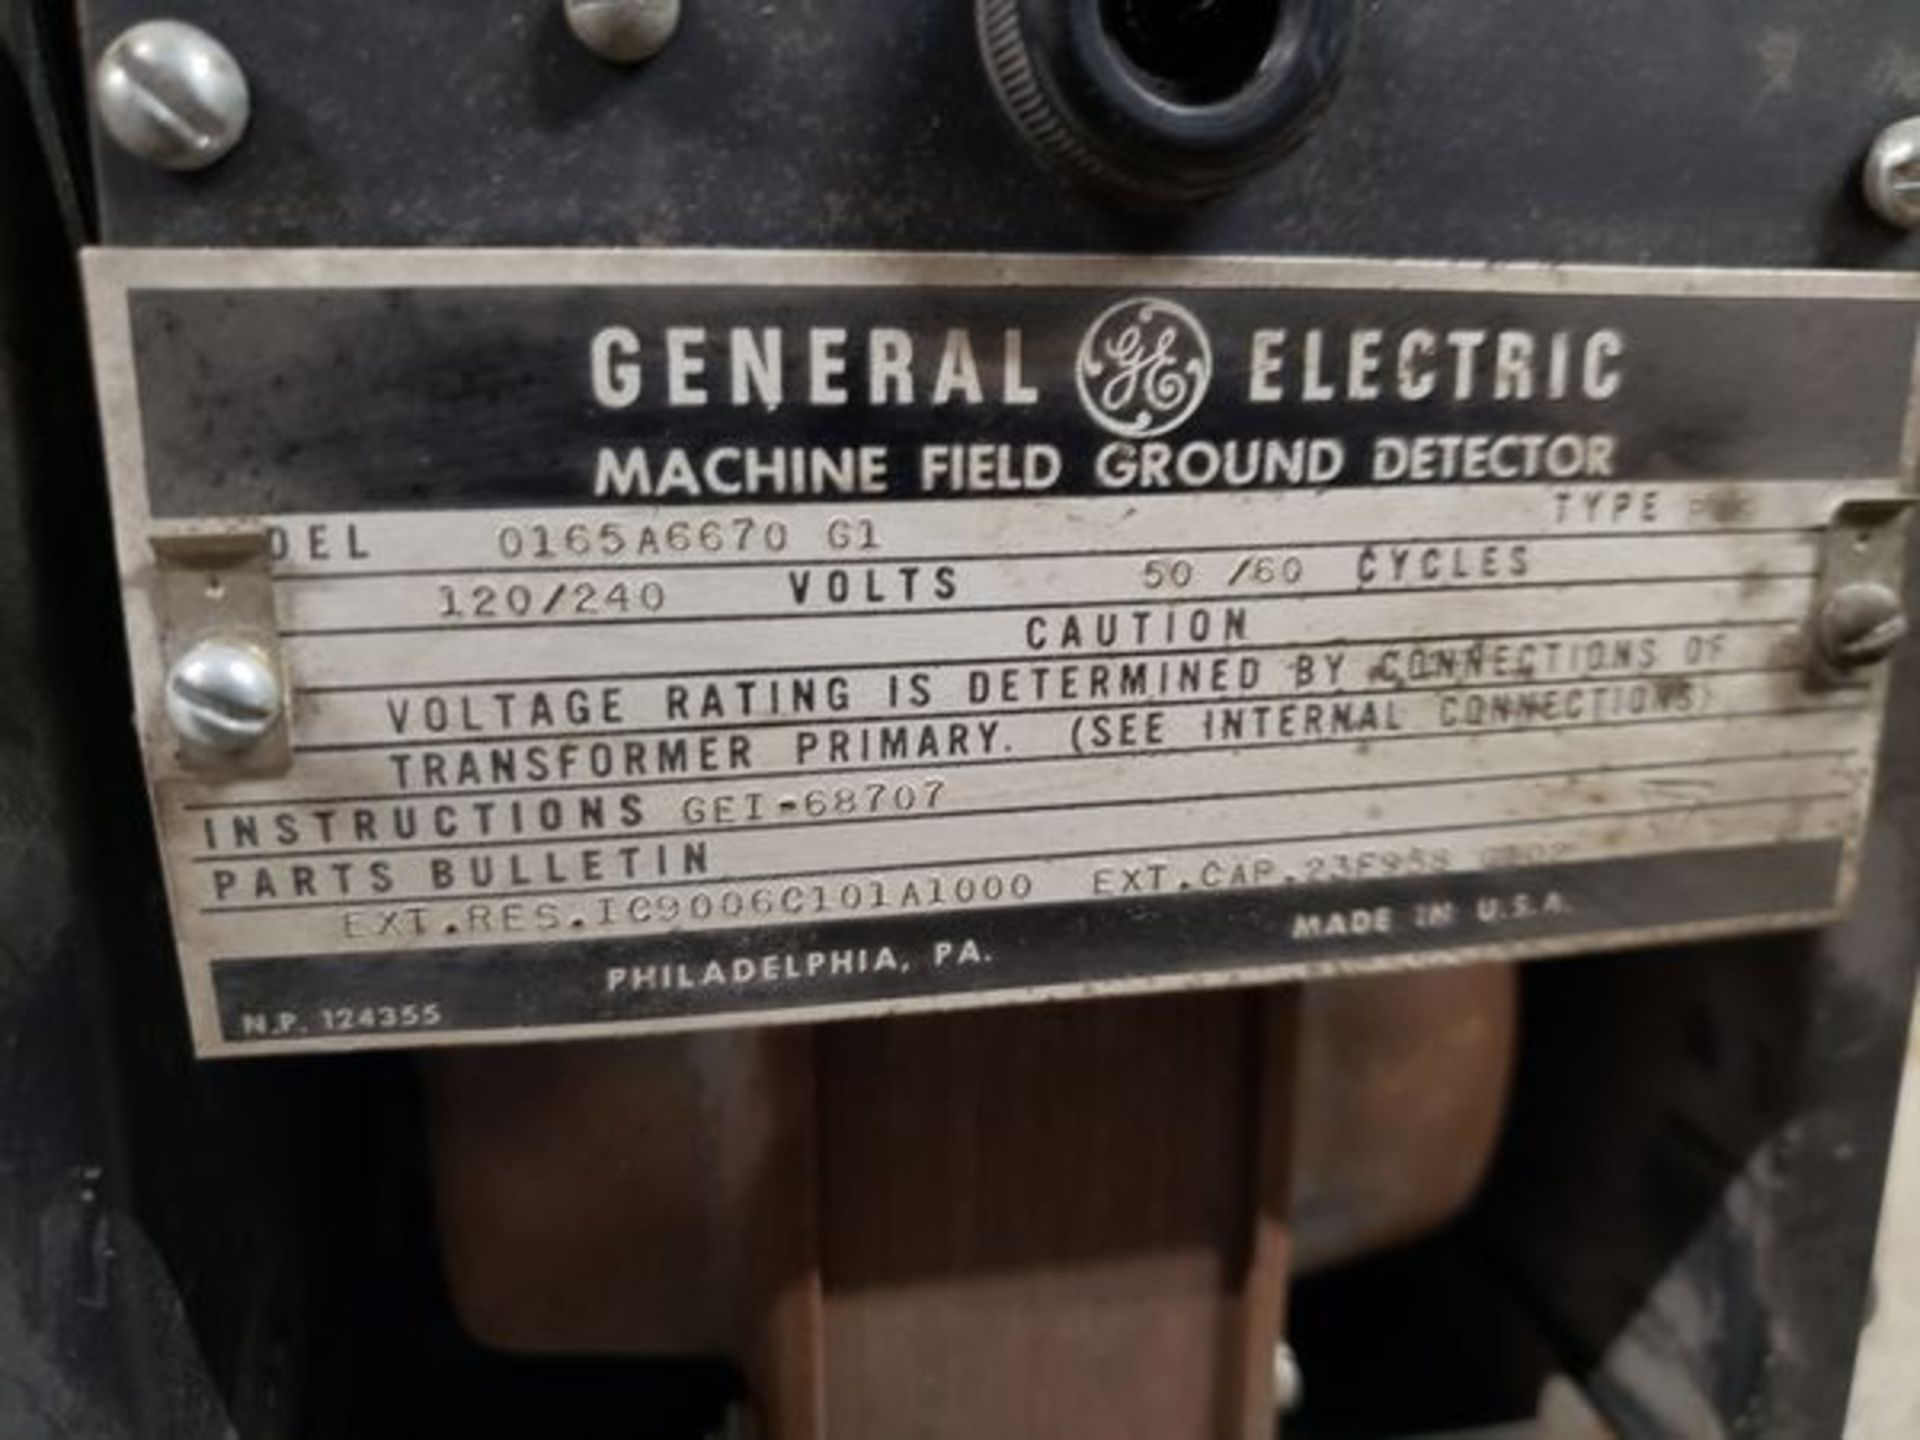 GE MACHINE FIELD GROUND DETECTOR - MODEL 0165A6670 - Image 2 of 3